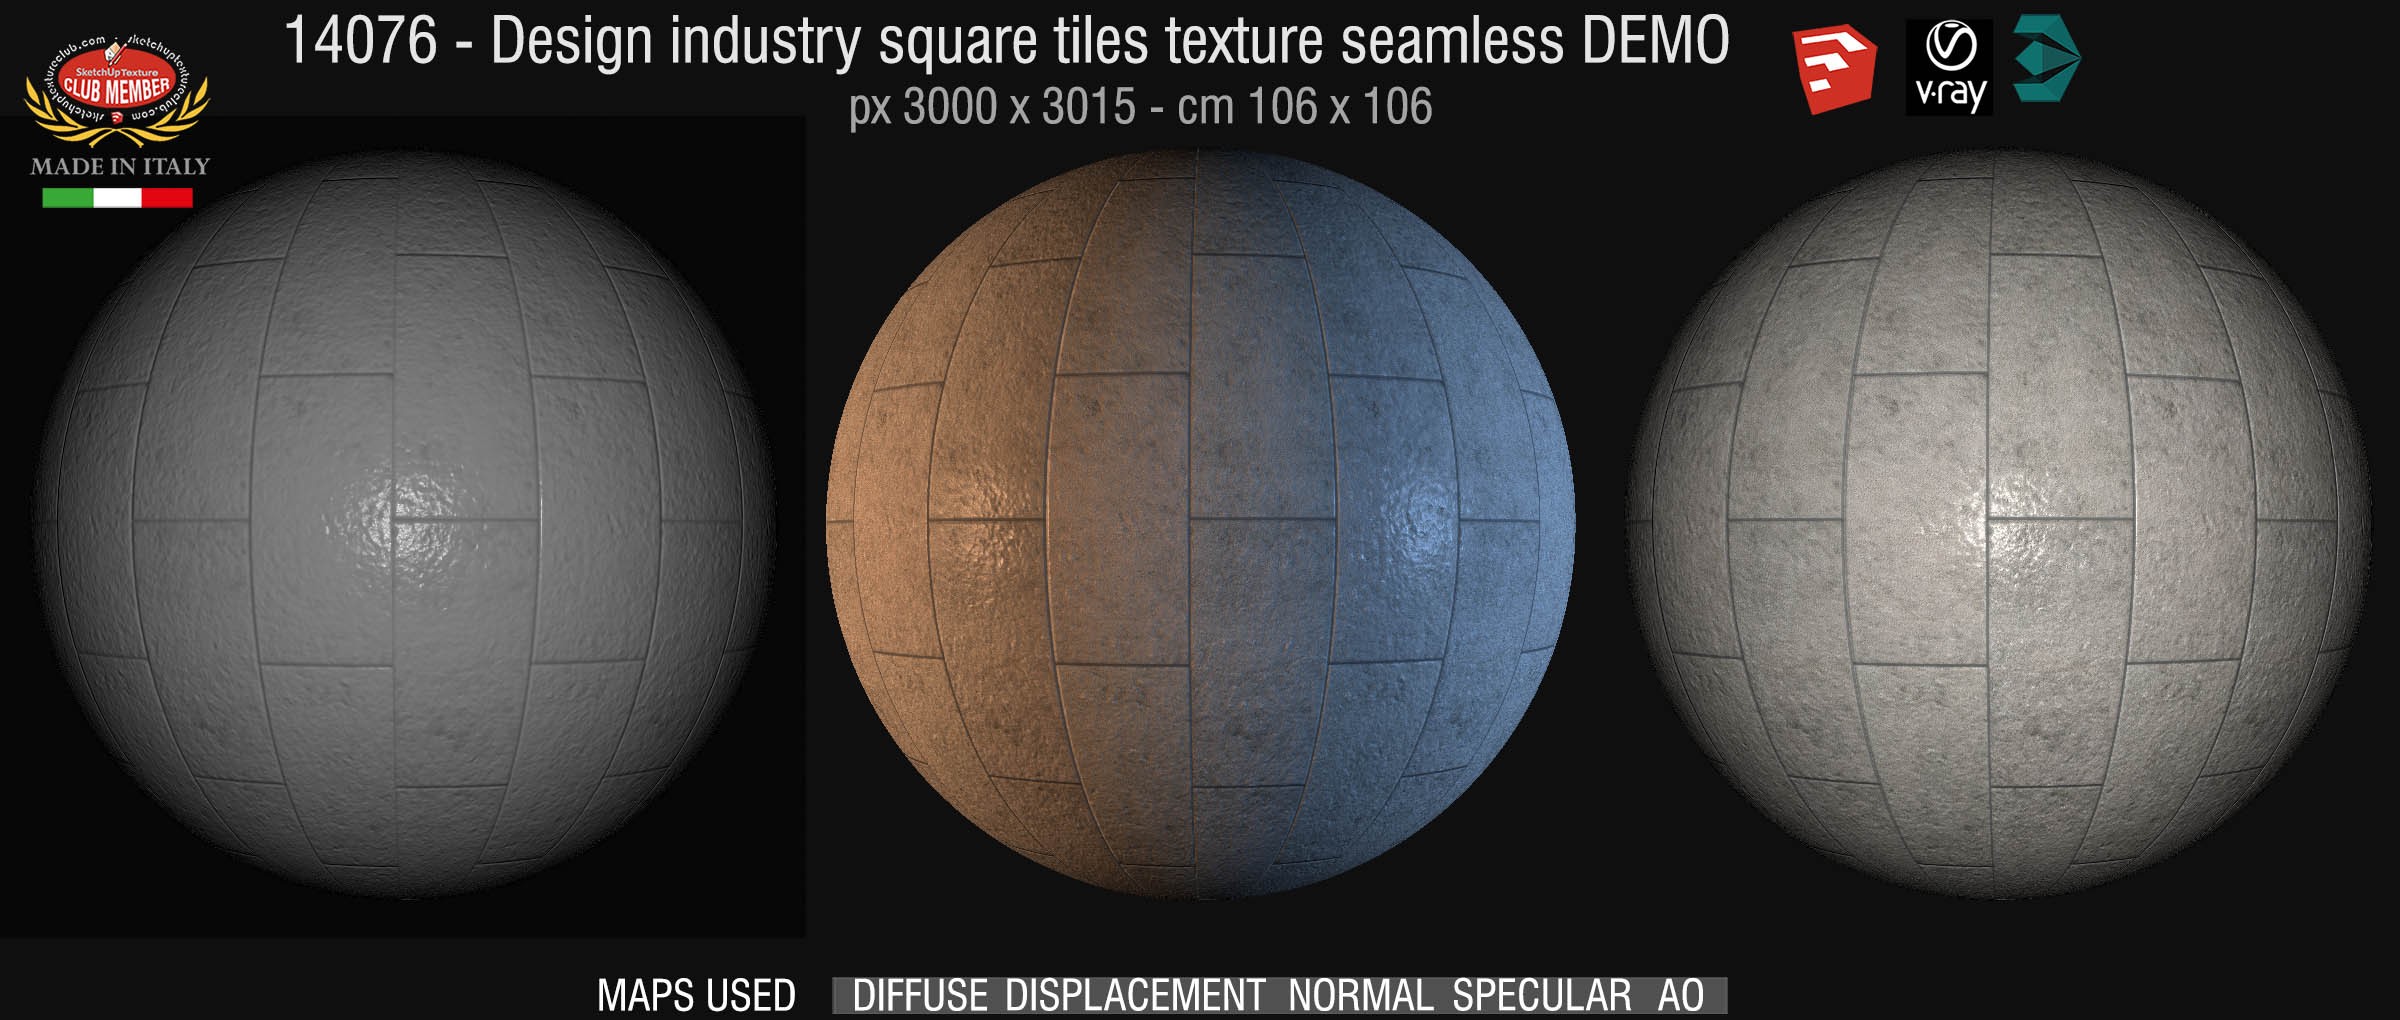 14076 Design industry square tile texture seamless + maps DEMO